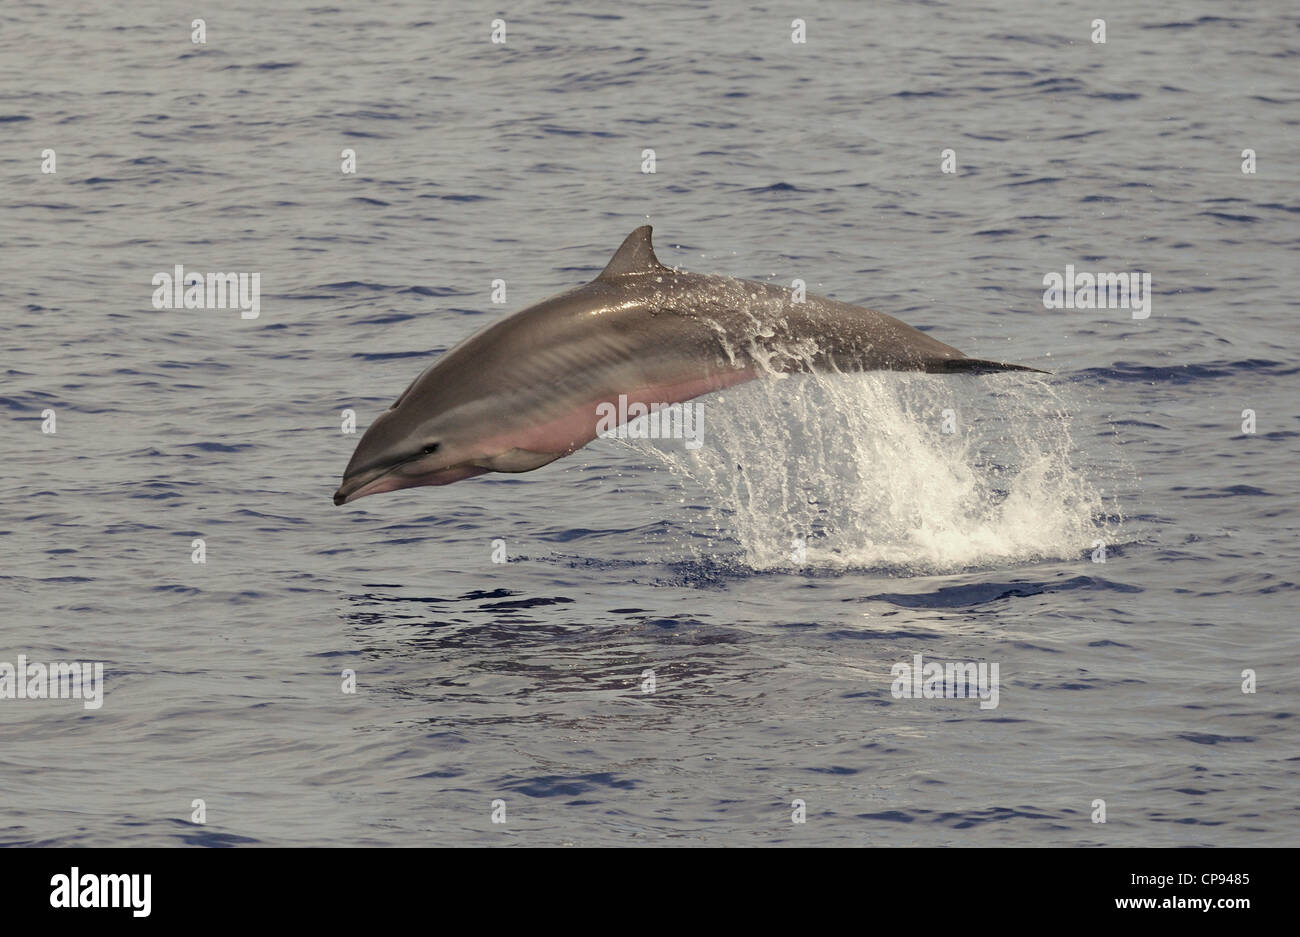 Fraser's Dolphin (Lagenodelphis hosei) or Sarawak Dolphin, leaping out of the sea, The Maldives Stock Photo